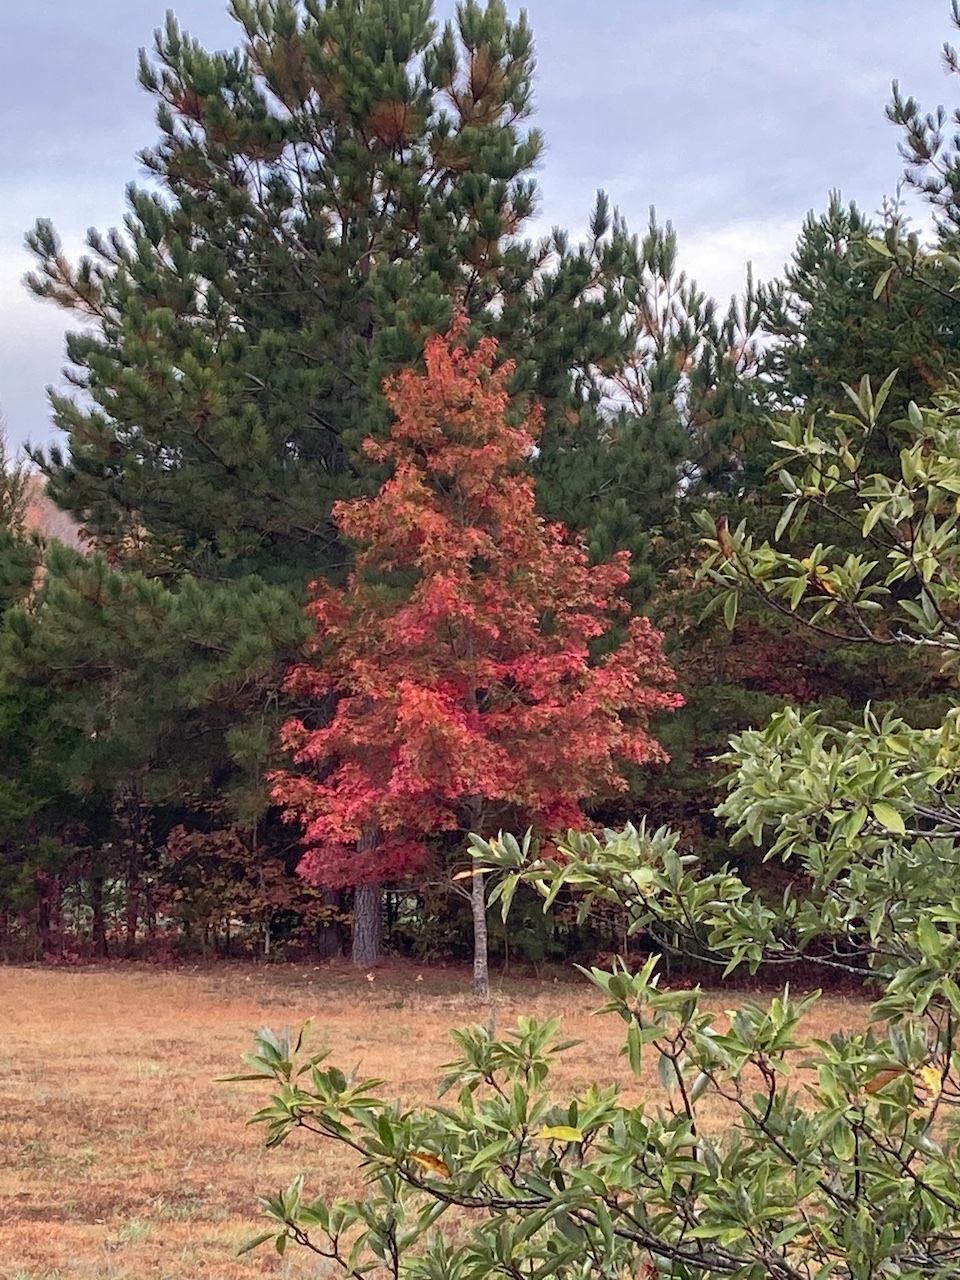 The Scientific Name is Quercus coccinea. You will likely hear them called Scarlet Oak. This picture shows the Young tree exhibiting its Fall colors. of Quercus coccinea